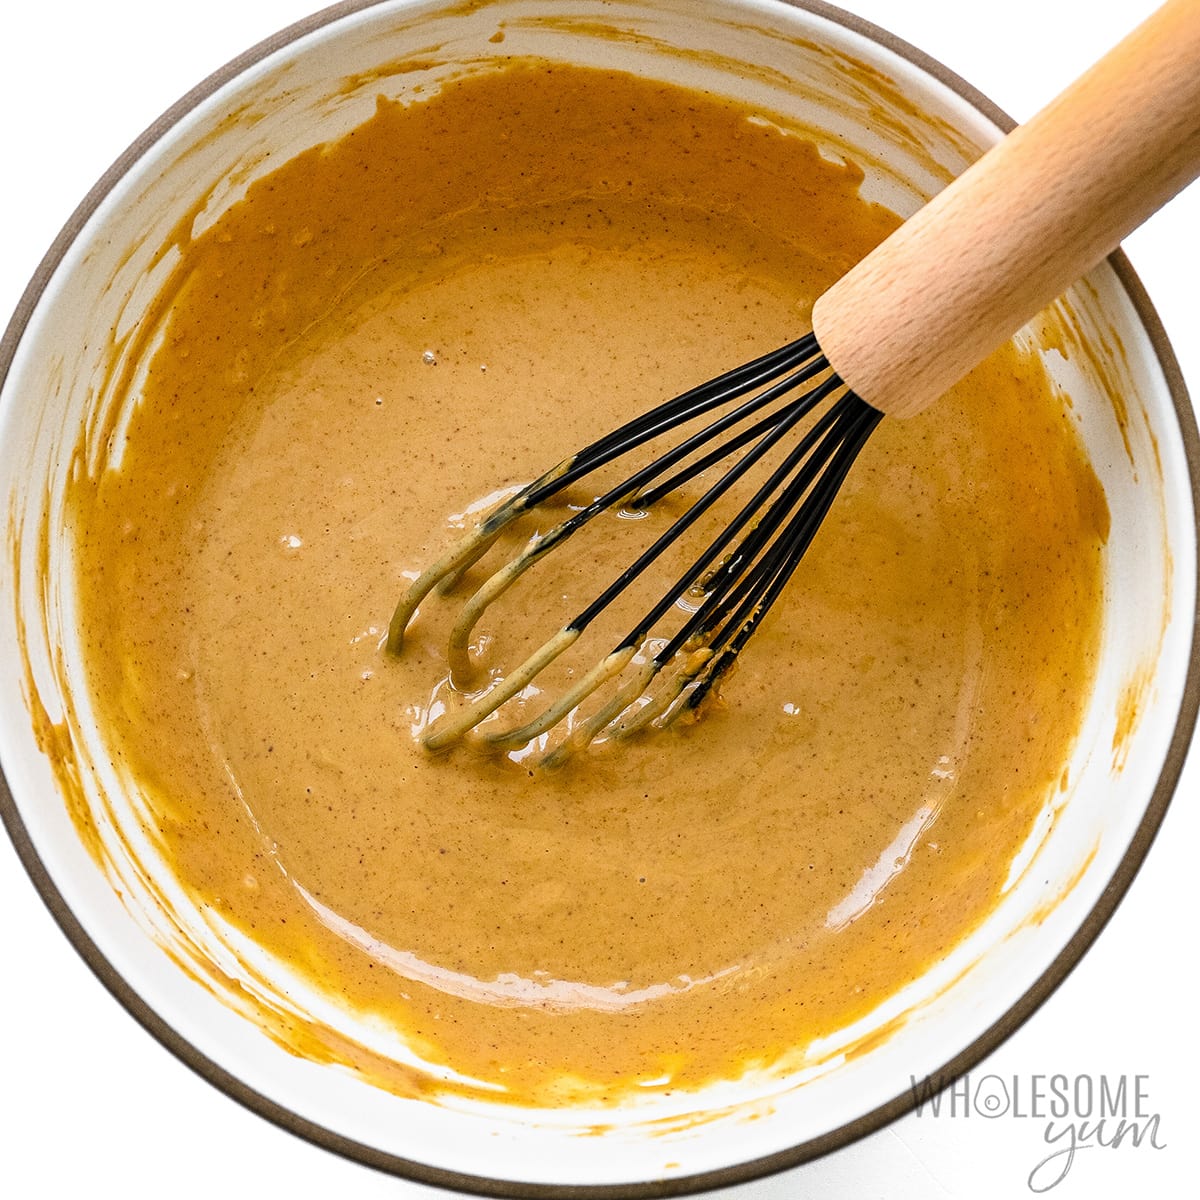 Finished peanut sauce recipe with whisk.